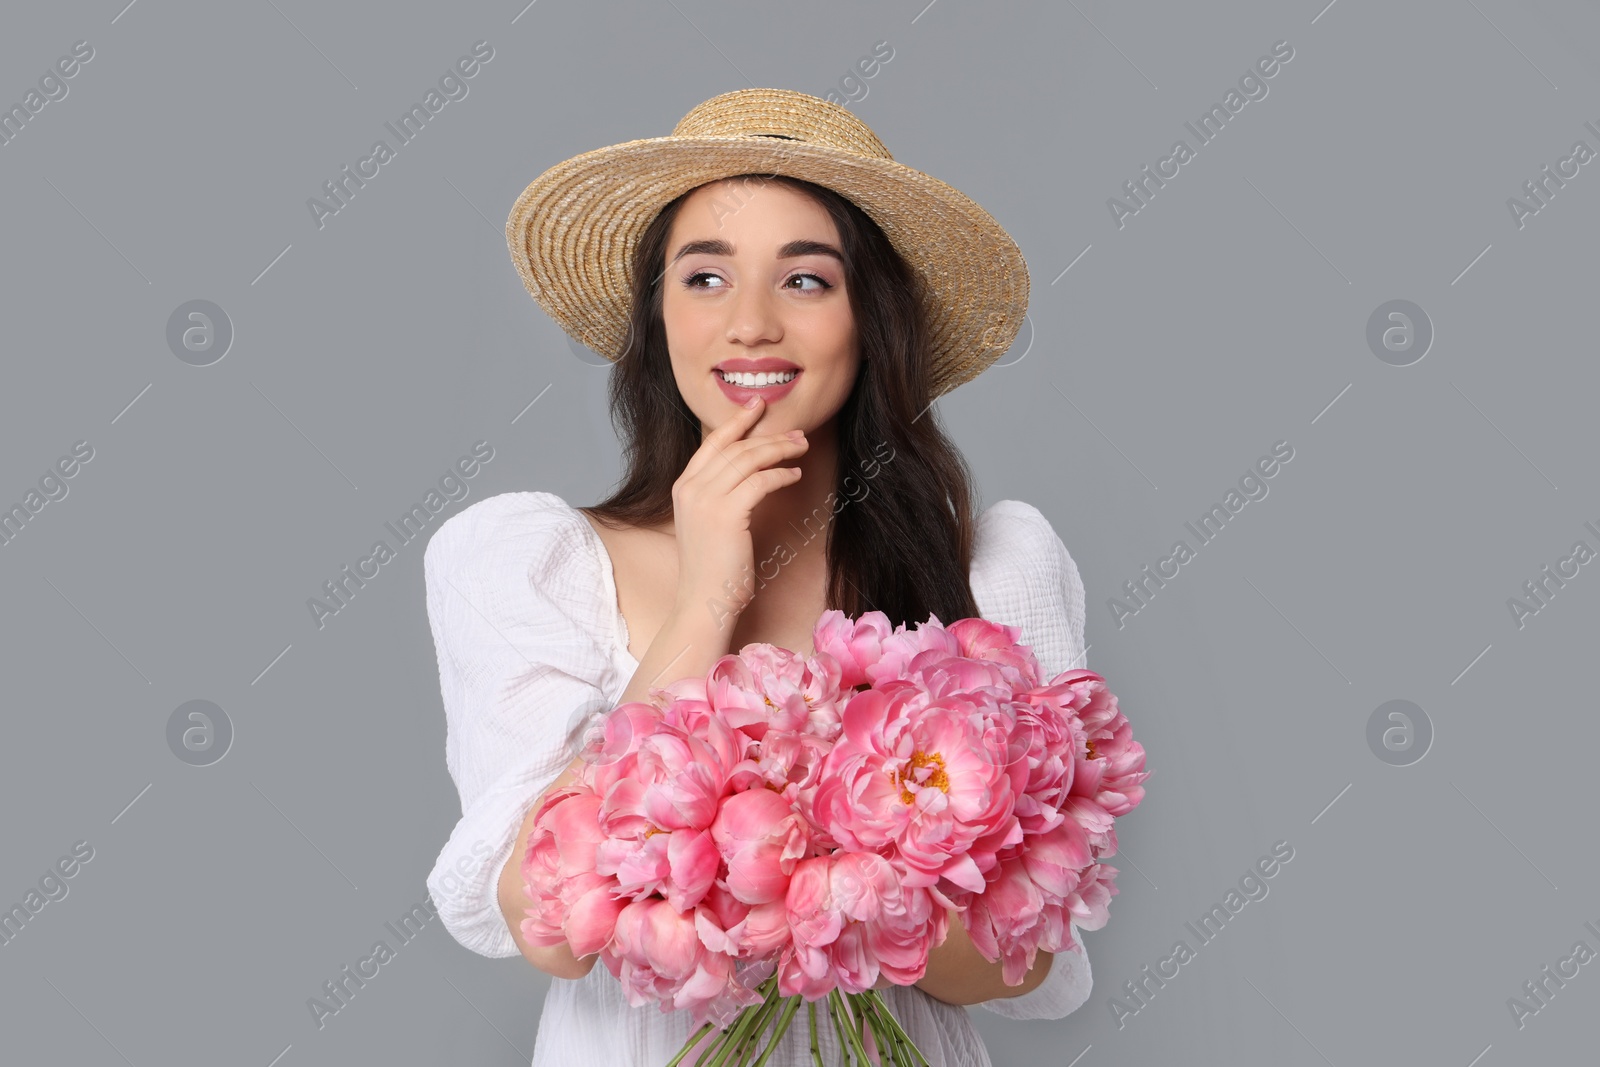 Photo of Beautiful young woman in straw hat with bouquet of pink peonies against grey background